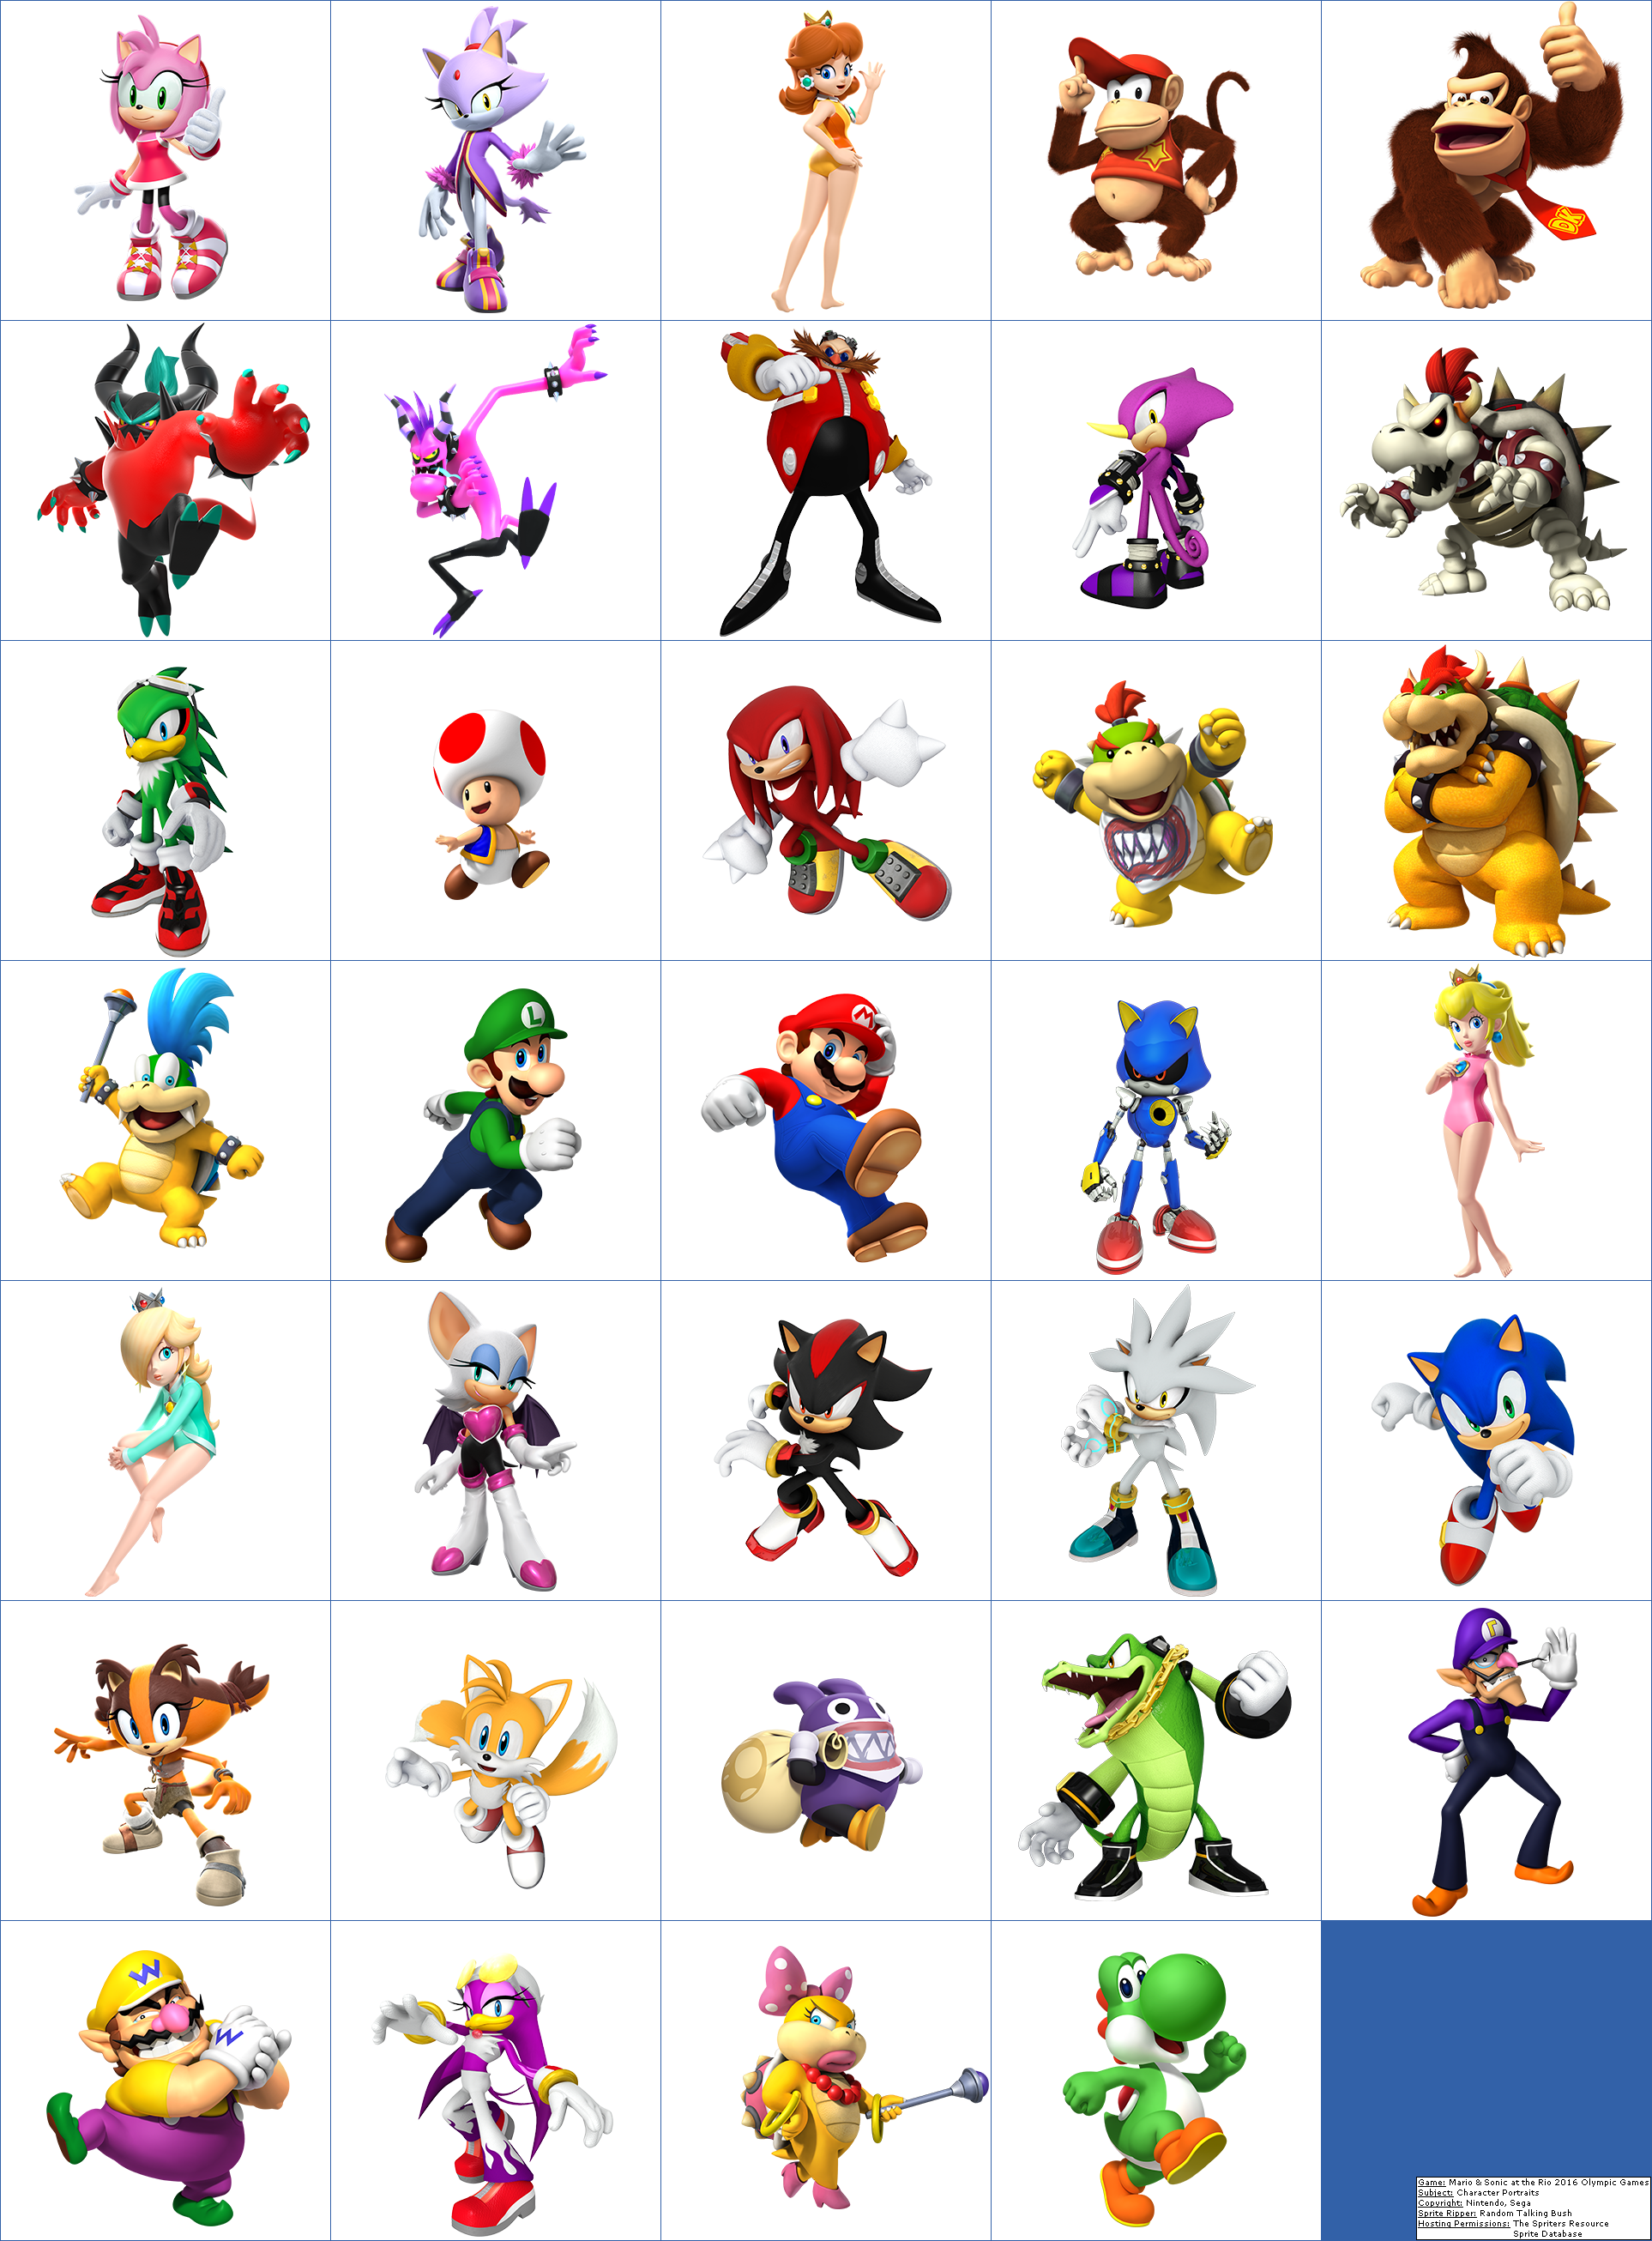 Mario & Sonic at the Rio 2016 Olympic Games - Character Portraits